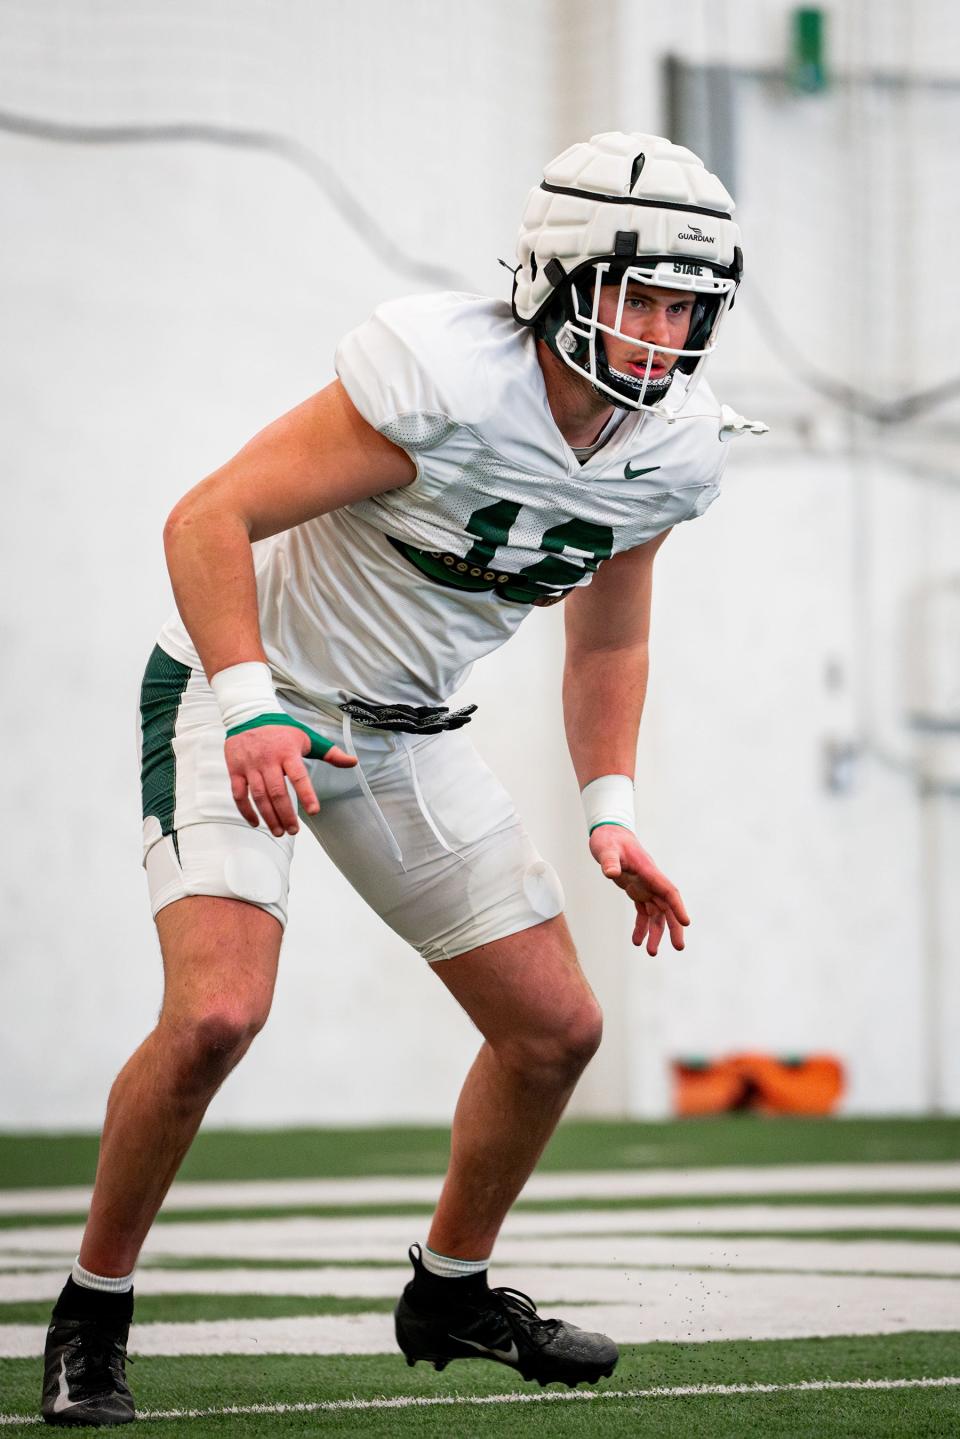 New Michigan State football junior tight end Jack Velling caught 45 passes for 719 yards and 11 touchdowns the past two seasons under new Spartans coach Jonathan Smith at Oregon State.